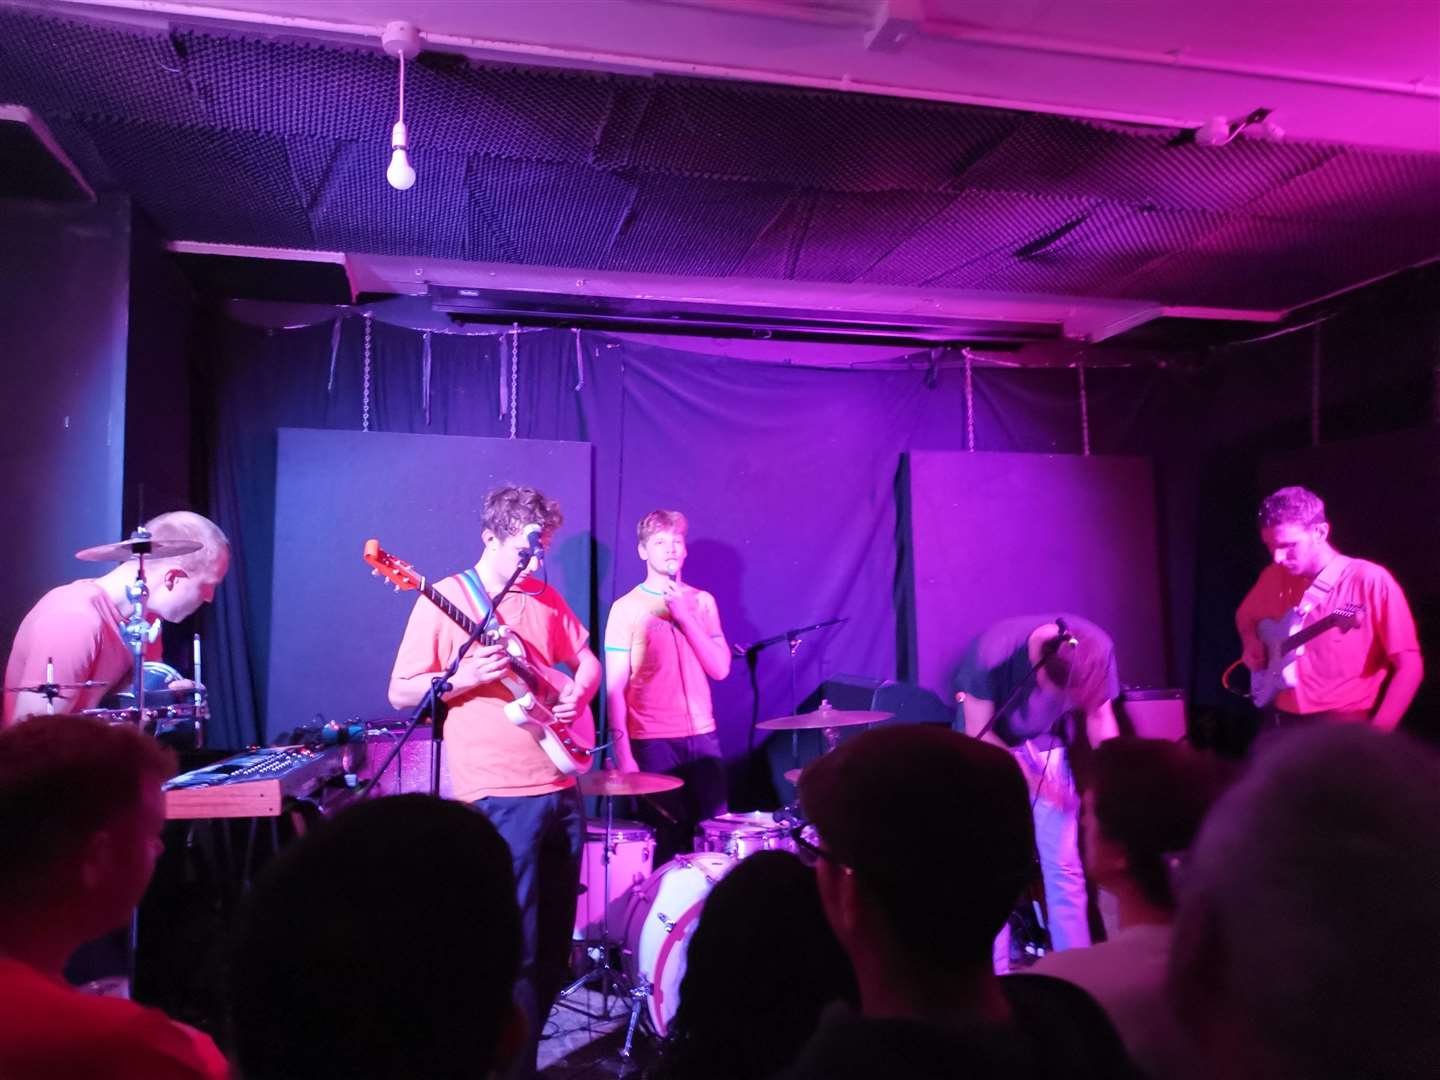 Squid performing at Elsewhere in Margate